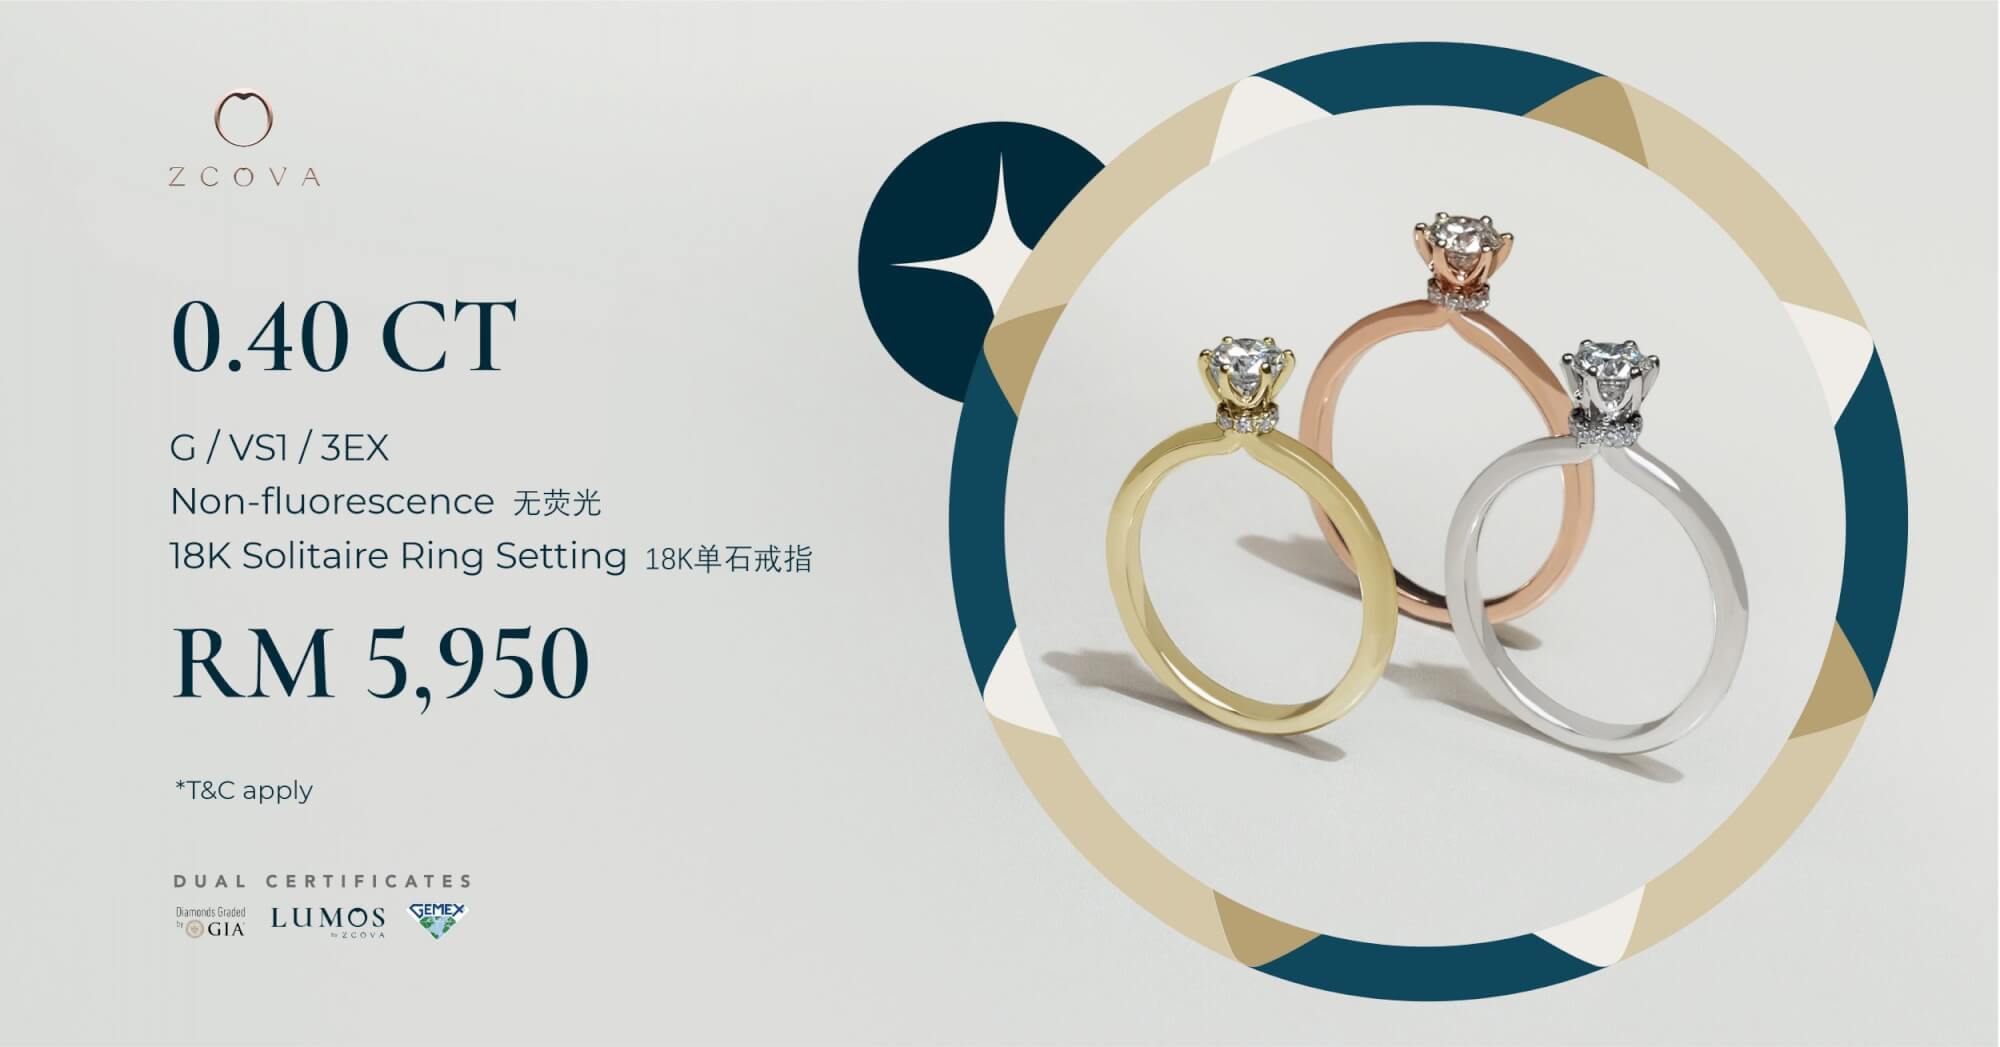 0.4 carat diamond engagement ring promotion malaysia with 0% instalment plan